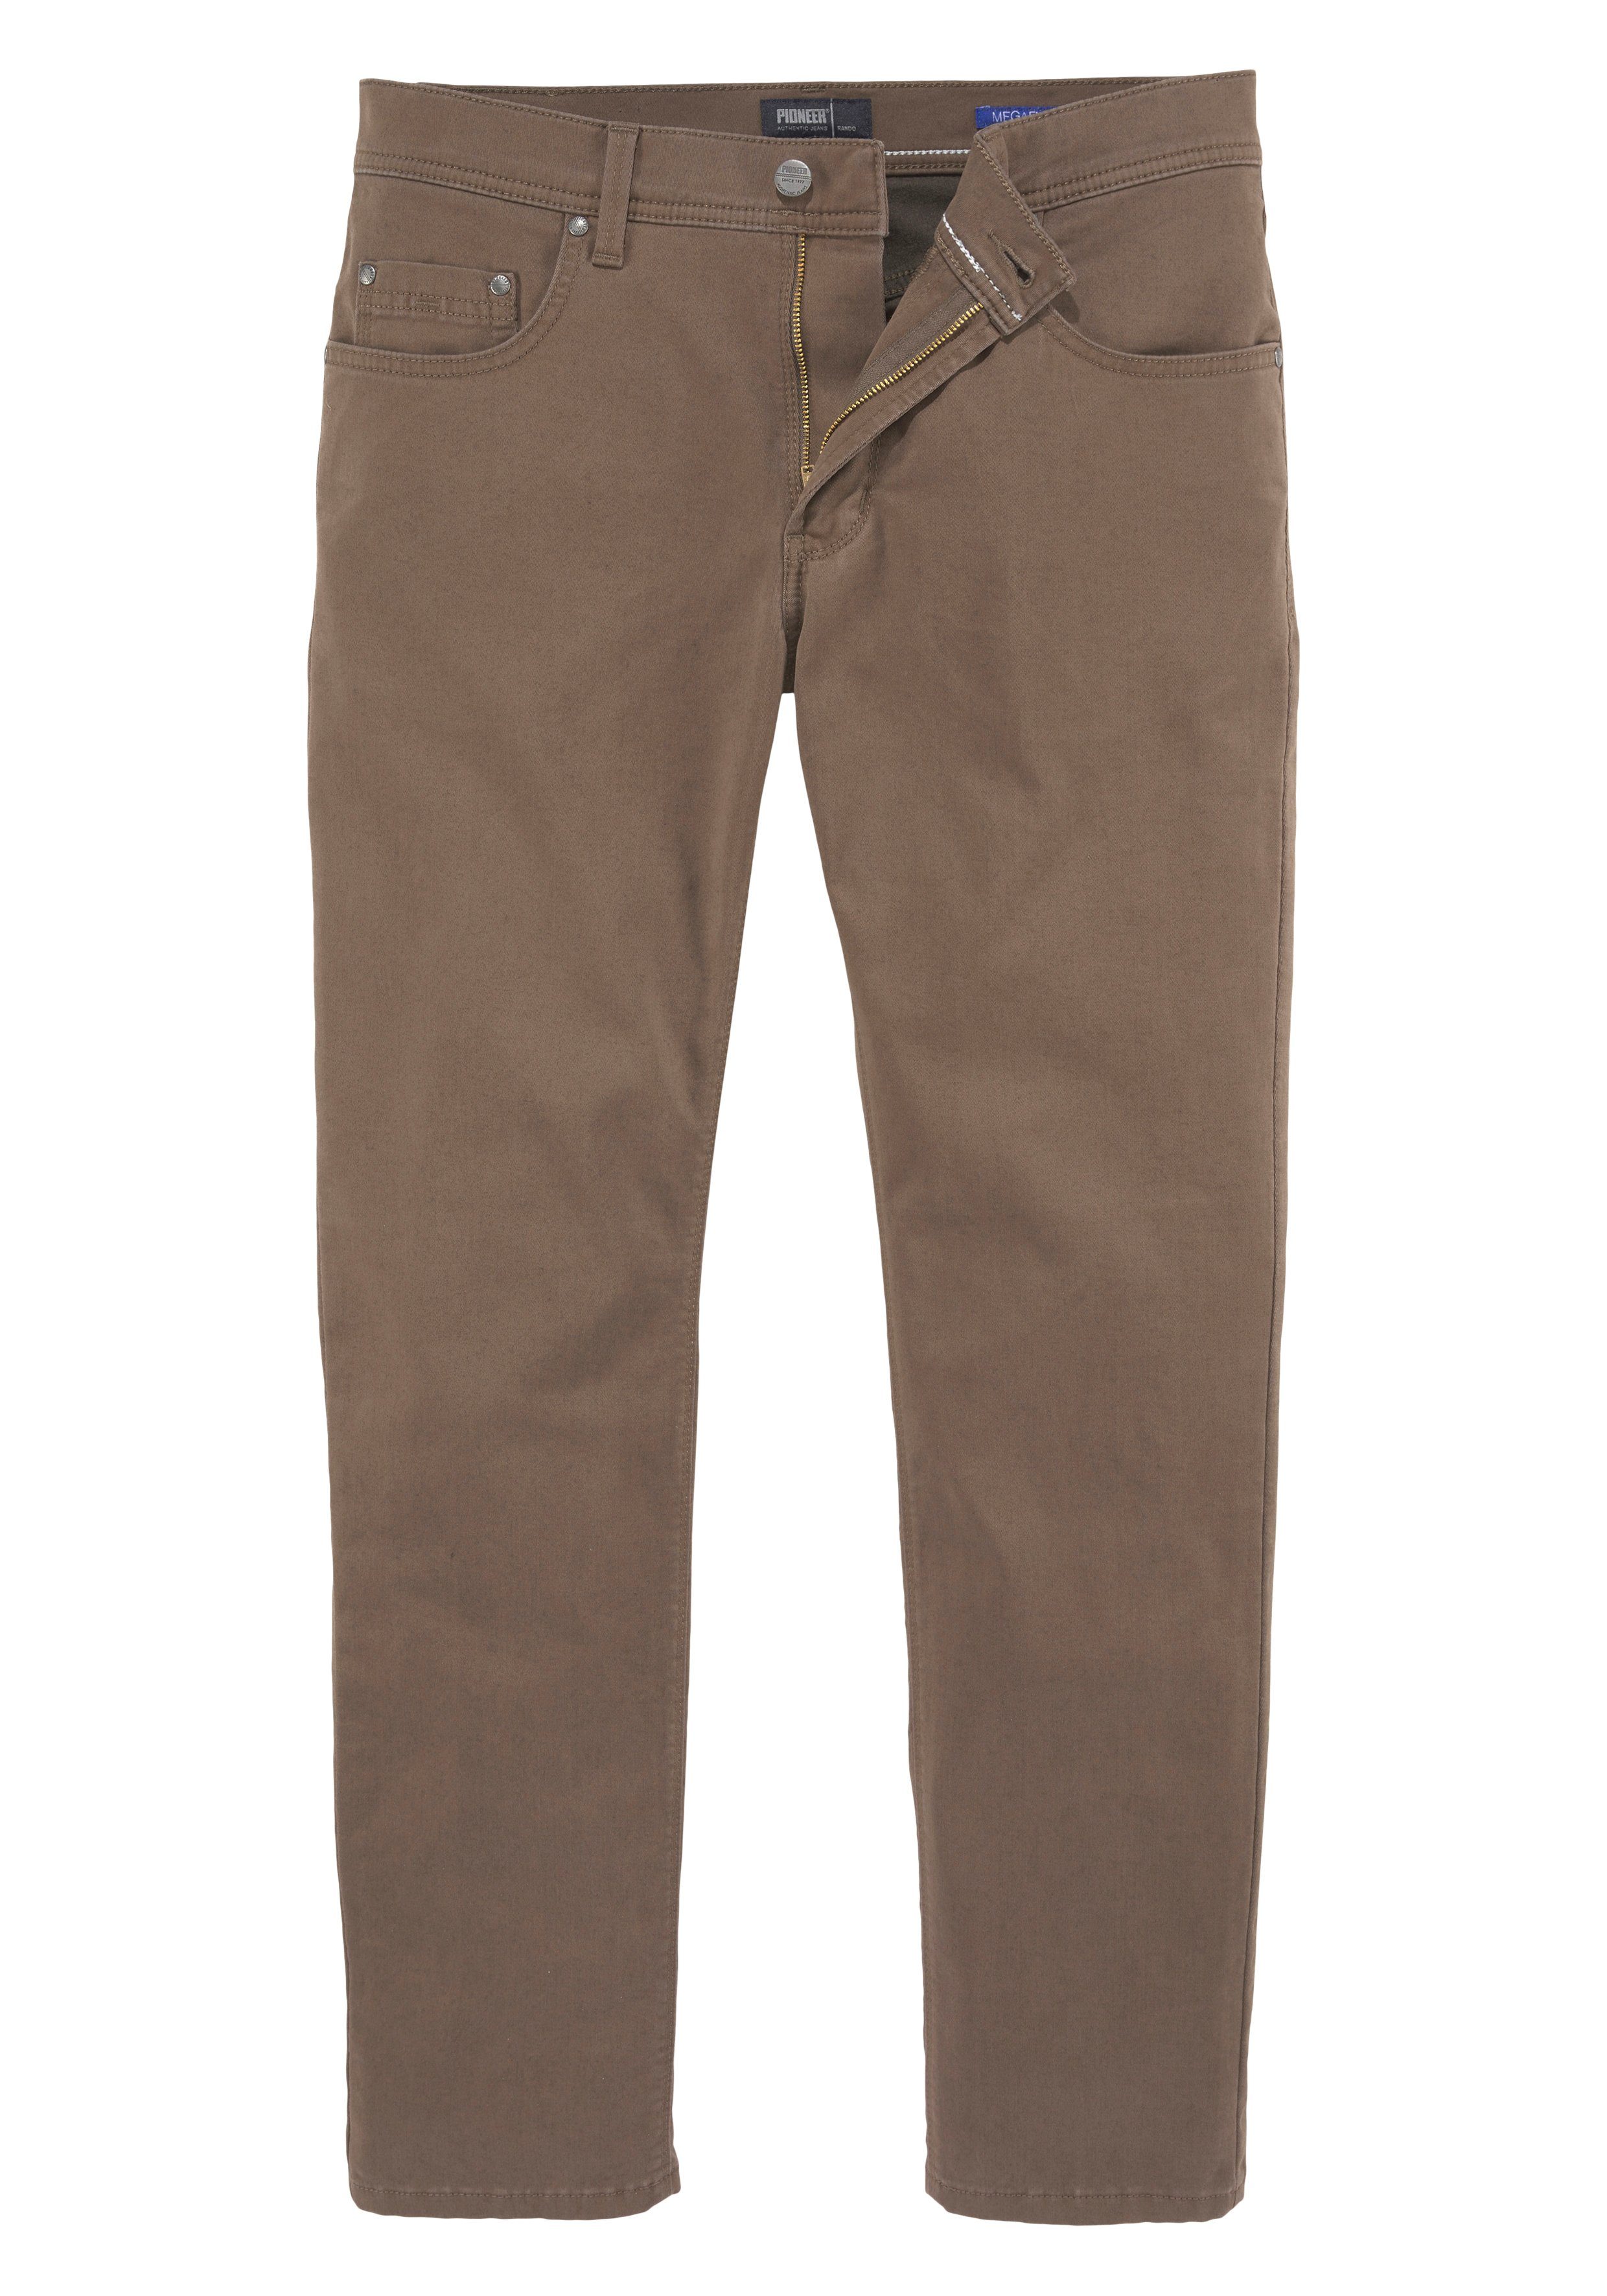 Thermolite deep Jeans Pioneer taupe 5-Pocket-Hose Rando Authentic